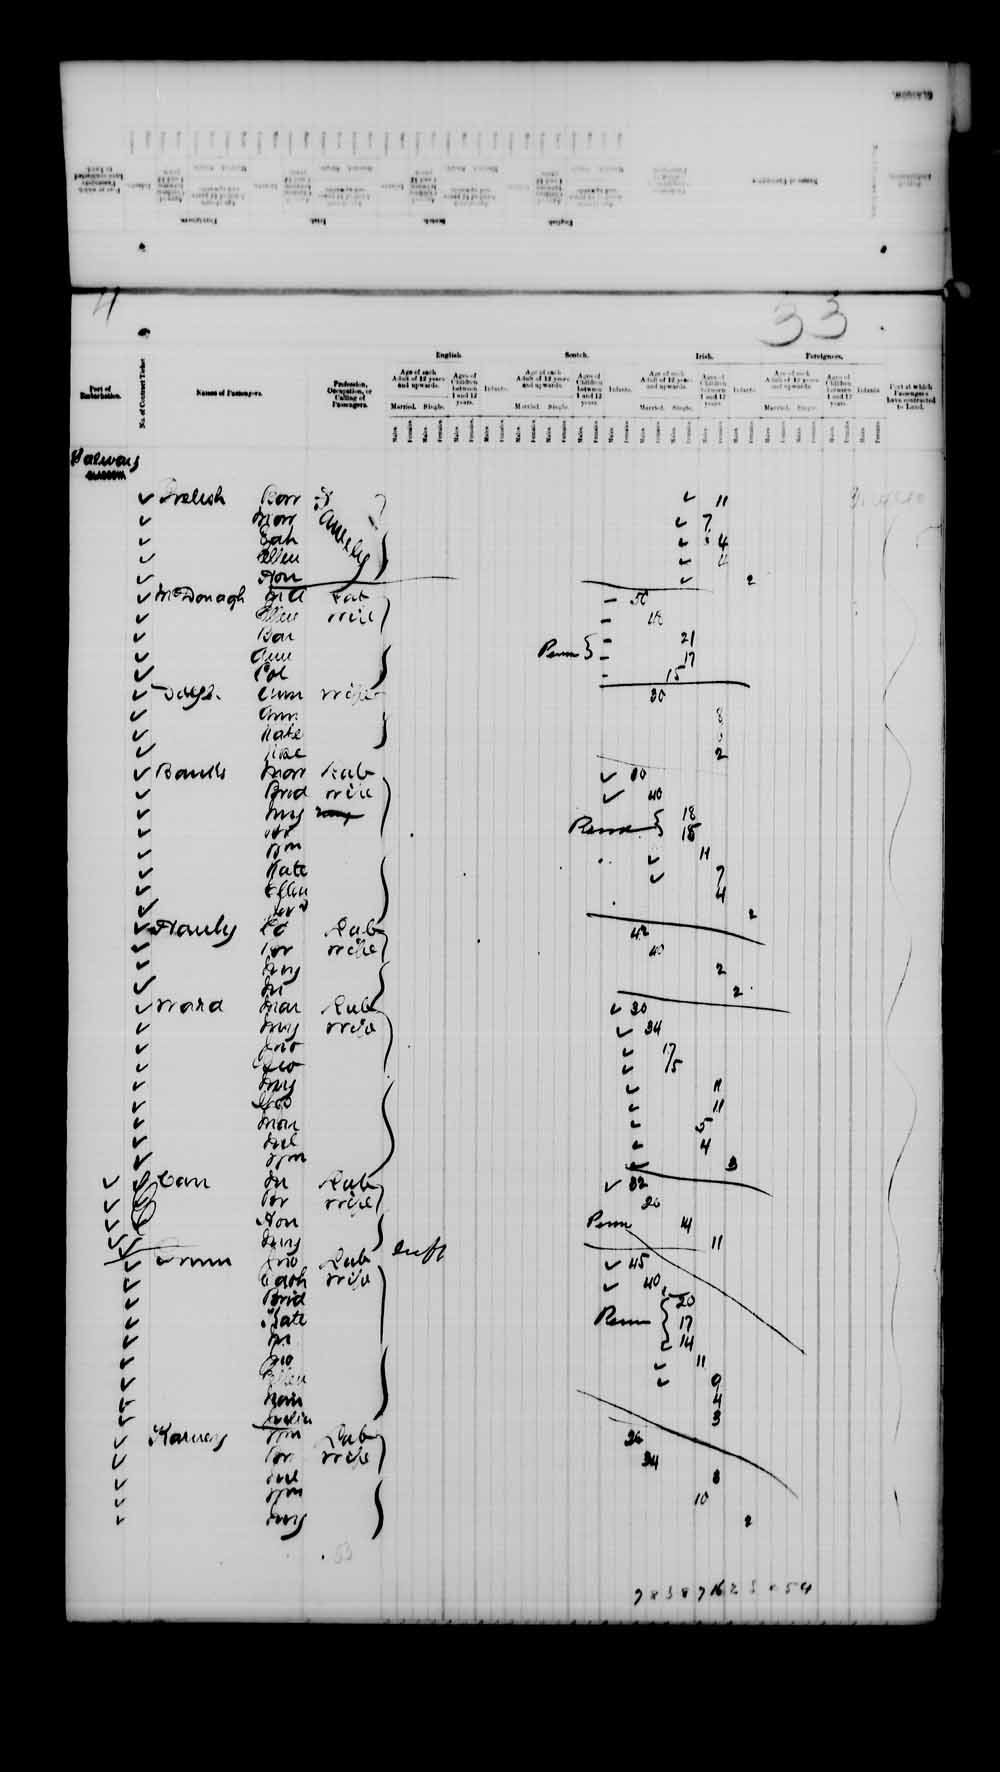 Digitized page of Passenger Lists for Image No.: e003543103